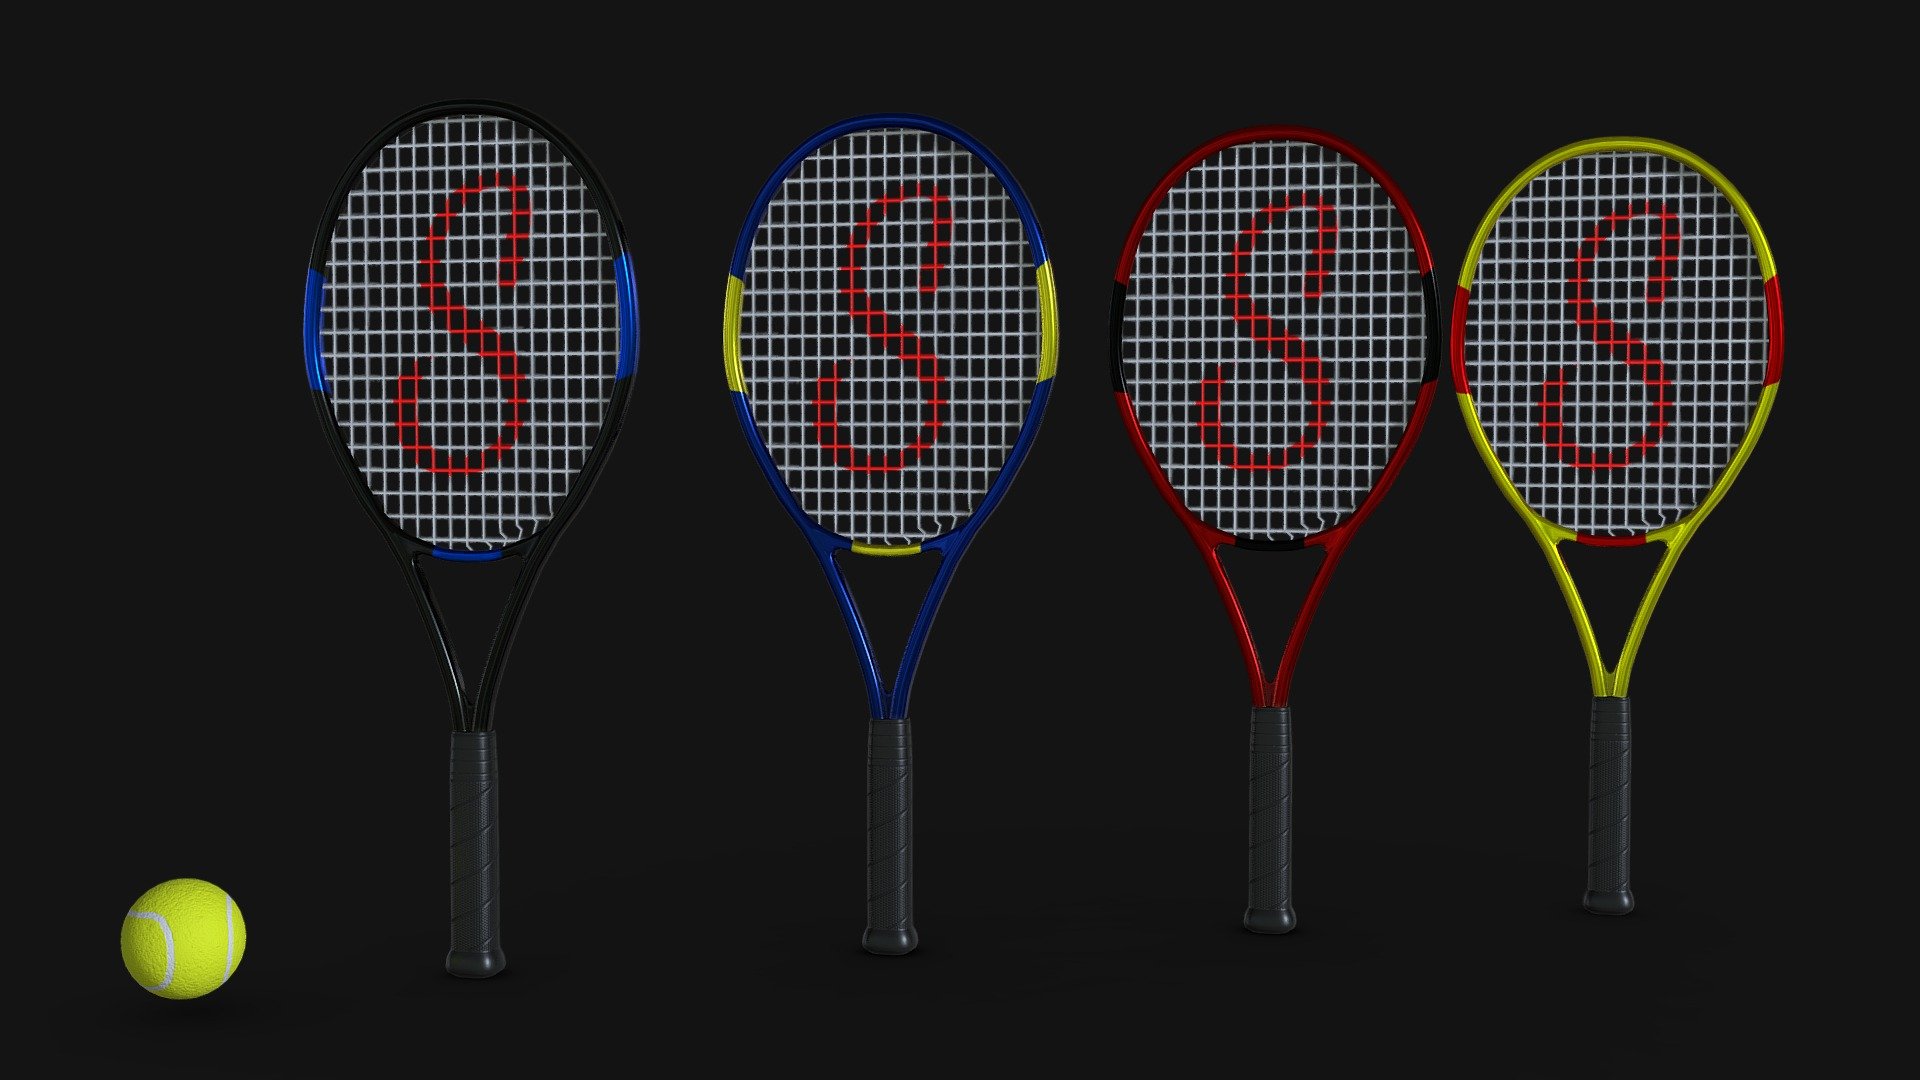 Tennis Racket - Ready for Games / VR / AR applications




Lowpoly

PBR

4K Textures

Files:




FBX

OBJ

MAX (2017)

Default Maps:




Diffuse

Roughness

Metallic

Normal

AO

Unreal:




Diffuse

OcclusionRoughnessMetallic

Normal

Unity HDRP:




Diffuse

MaskMap

Normal
 - Tennis Racket - Buy Royalty Free 3D model by matoteus 3d model